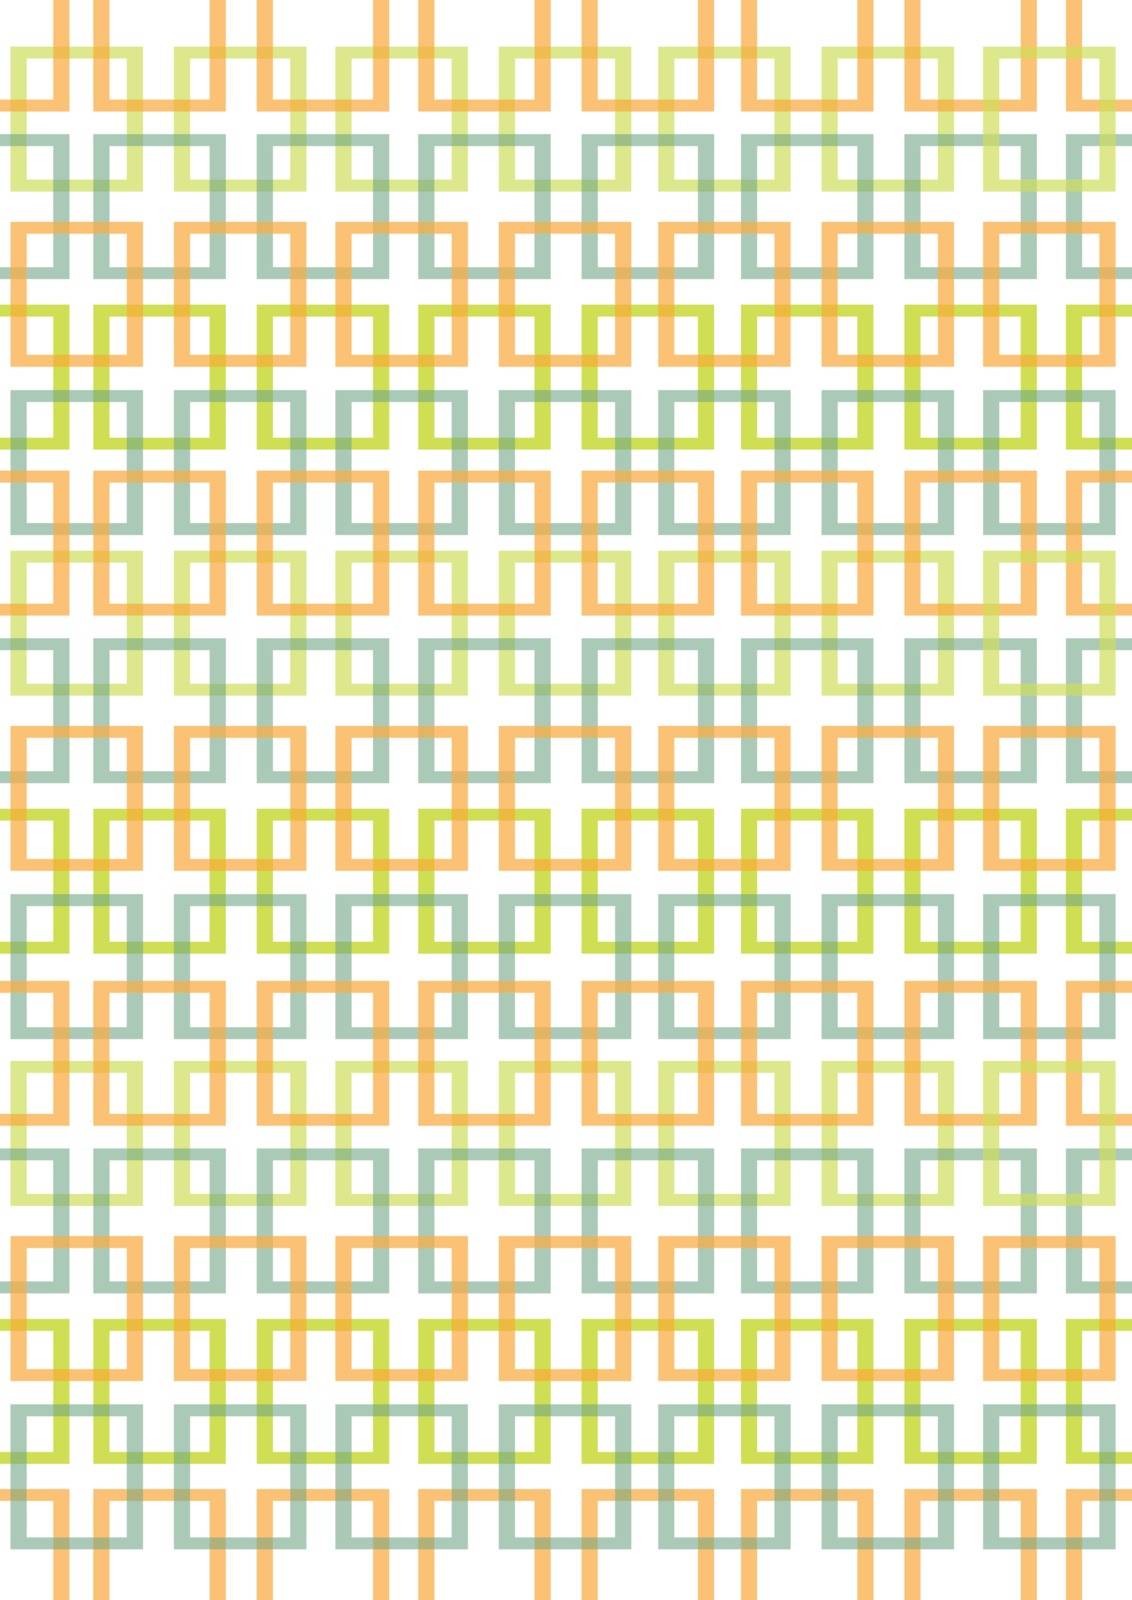 Pattern made from stacked rectangular shape.